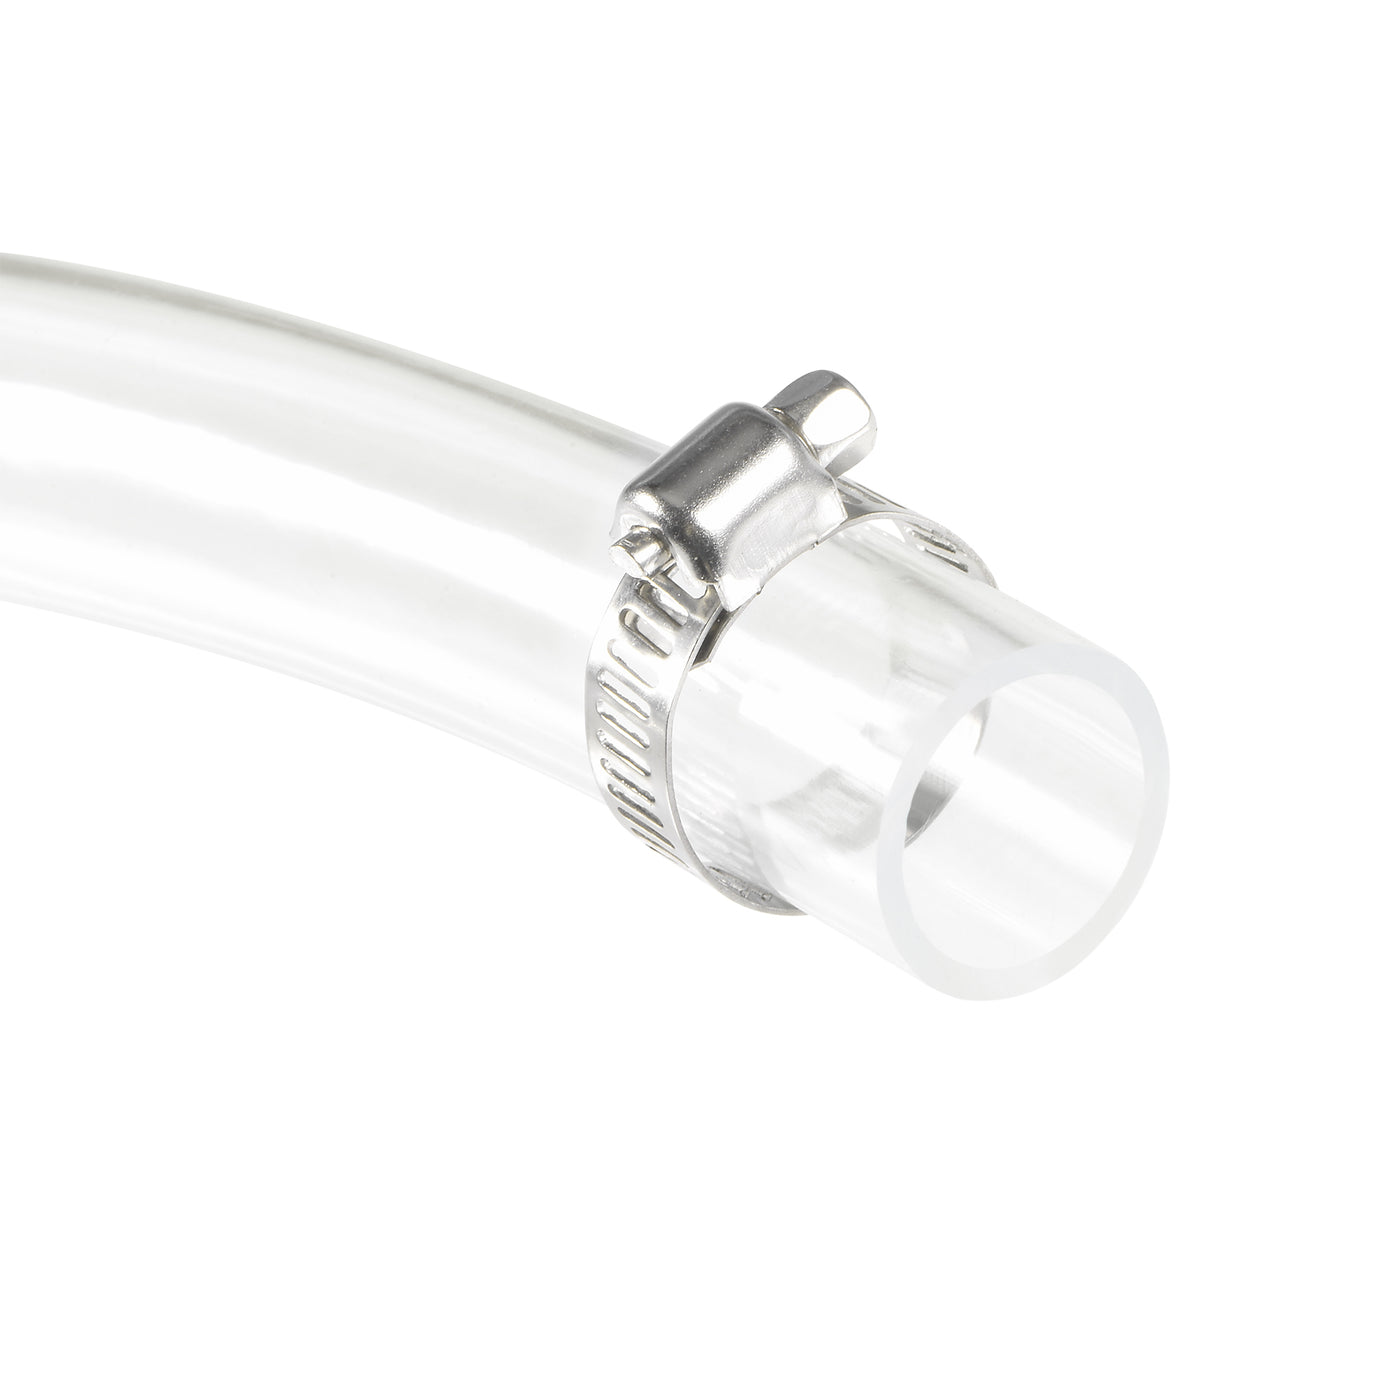 Uxcell Uxcell PVC Clear Vinyl Tubing, 12mm(1/2") ID 16mm(5/8") OD 6.6ft Plastic Pipe Air Water Hose with Clamps